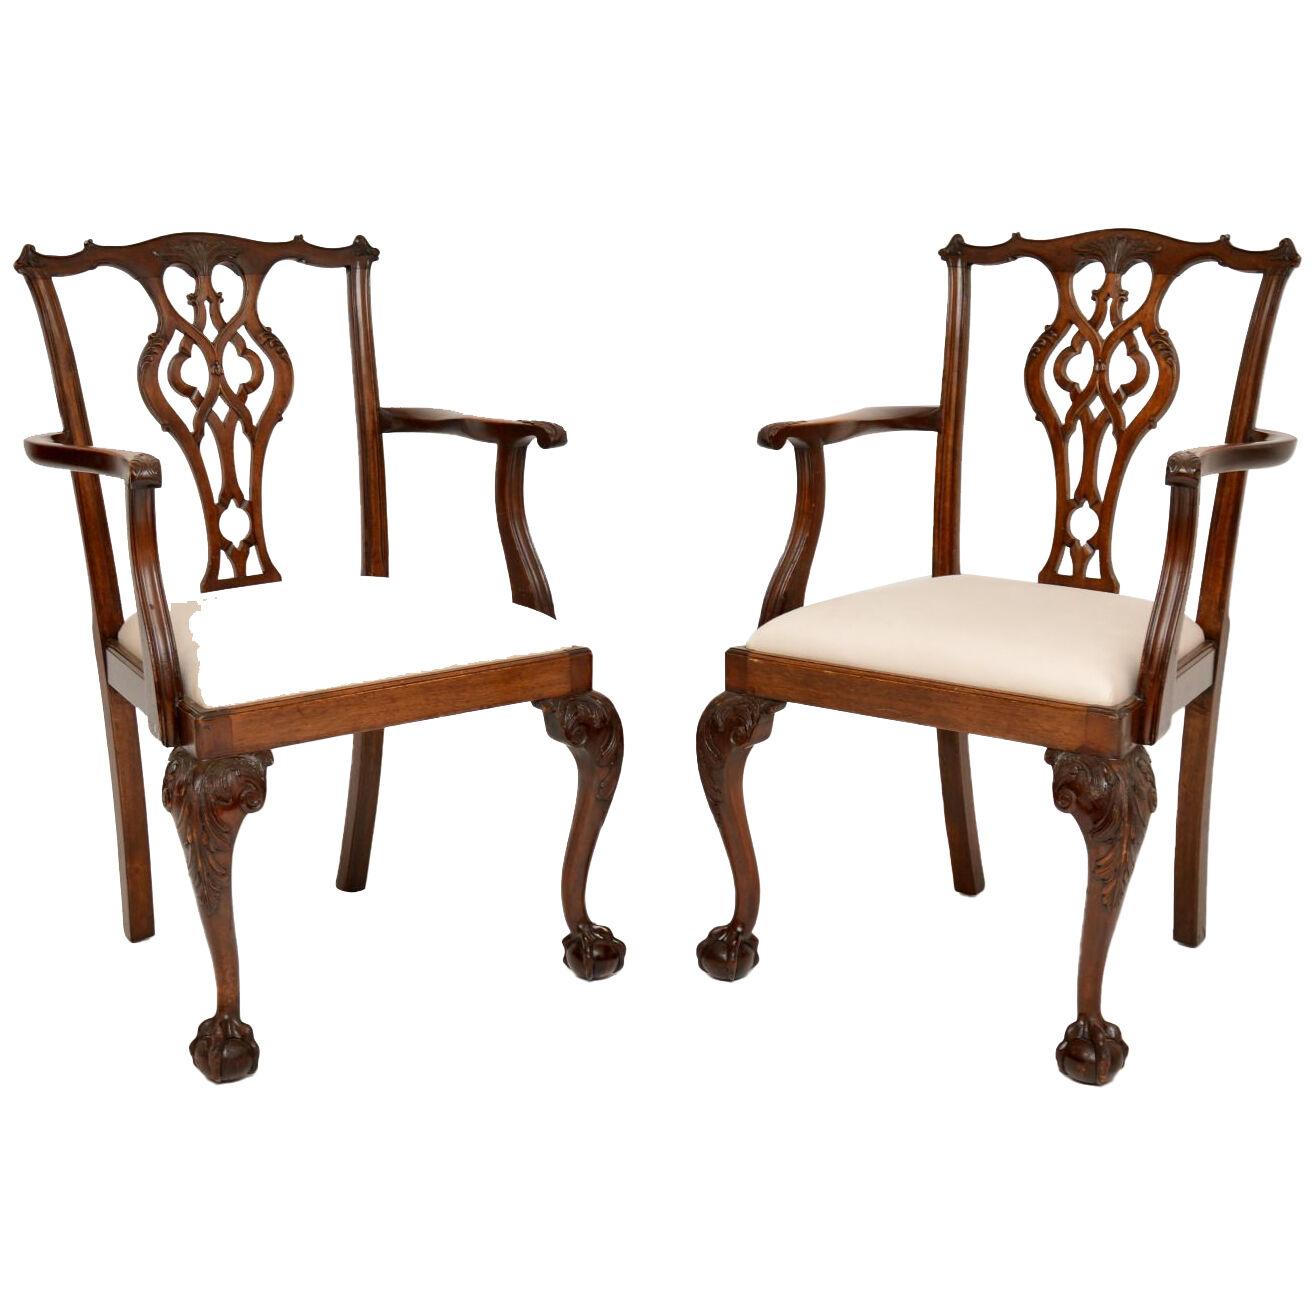 Pair of Antique Chippendale Revival Mahogany Carver Armchairs